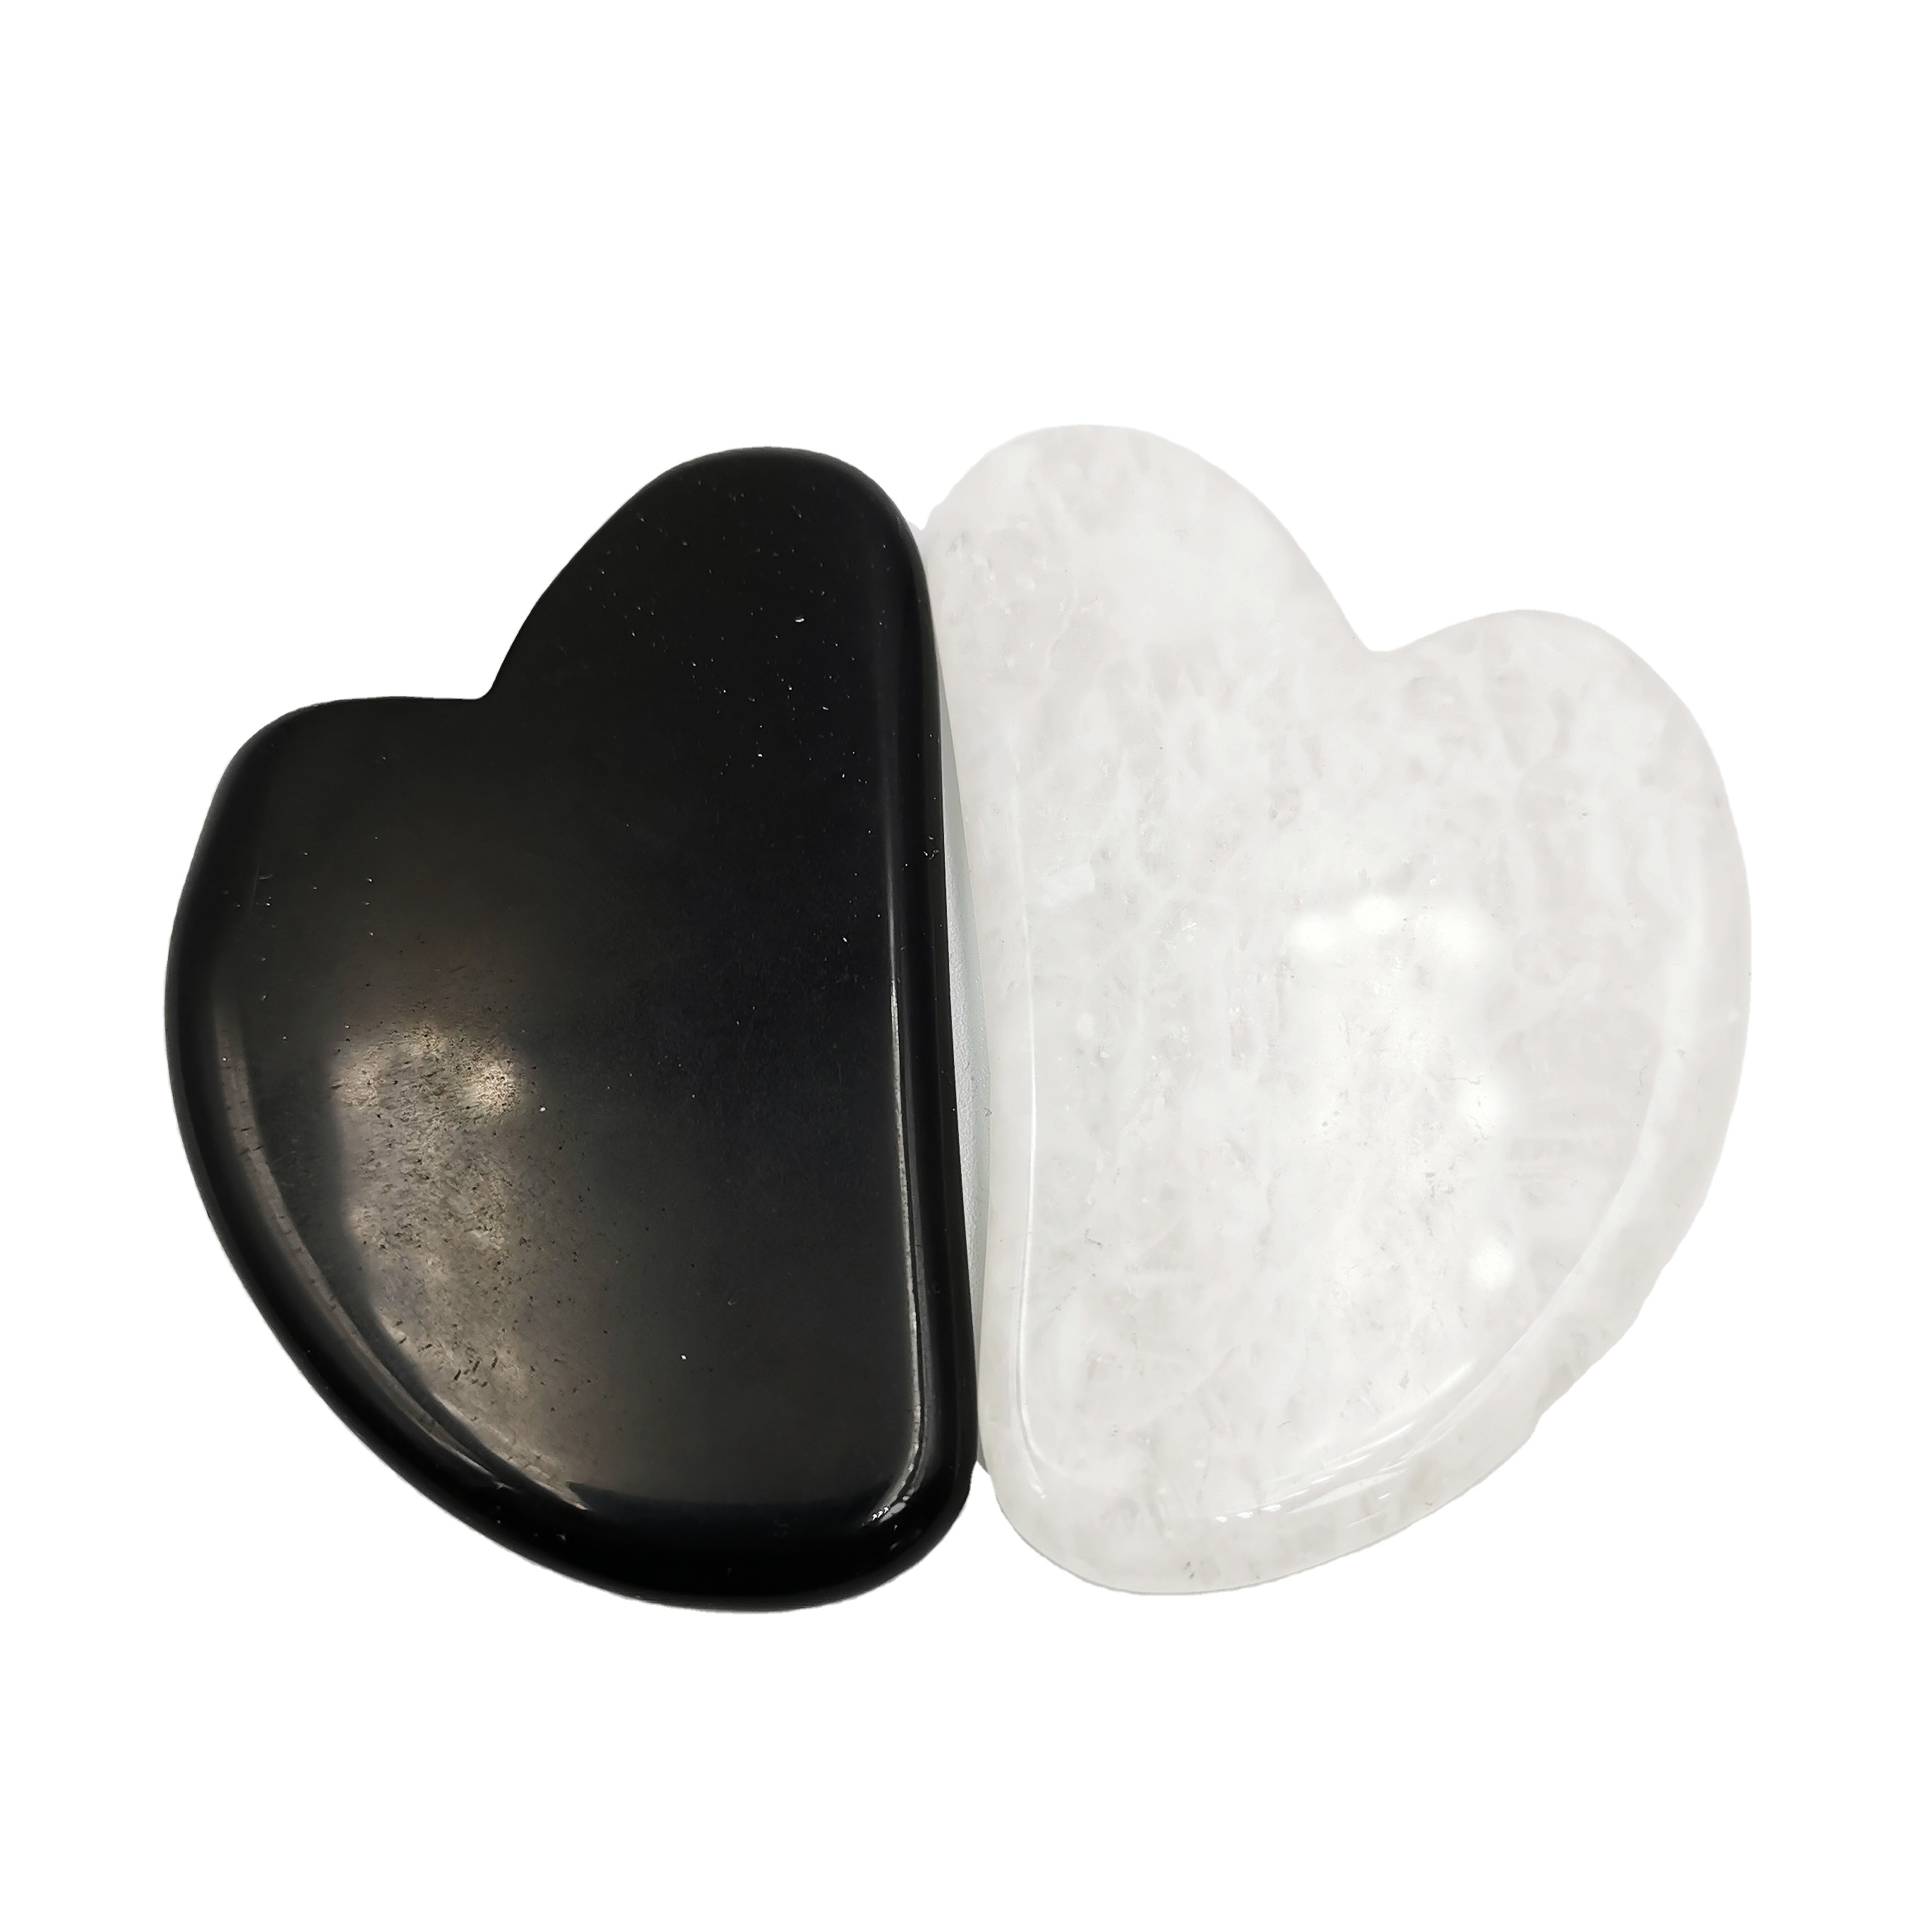 Great Quality Heart Shaped Crystal